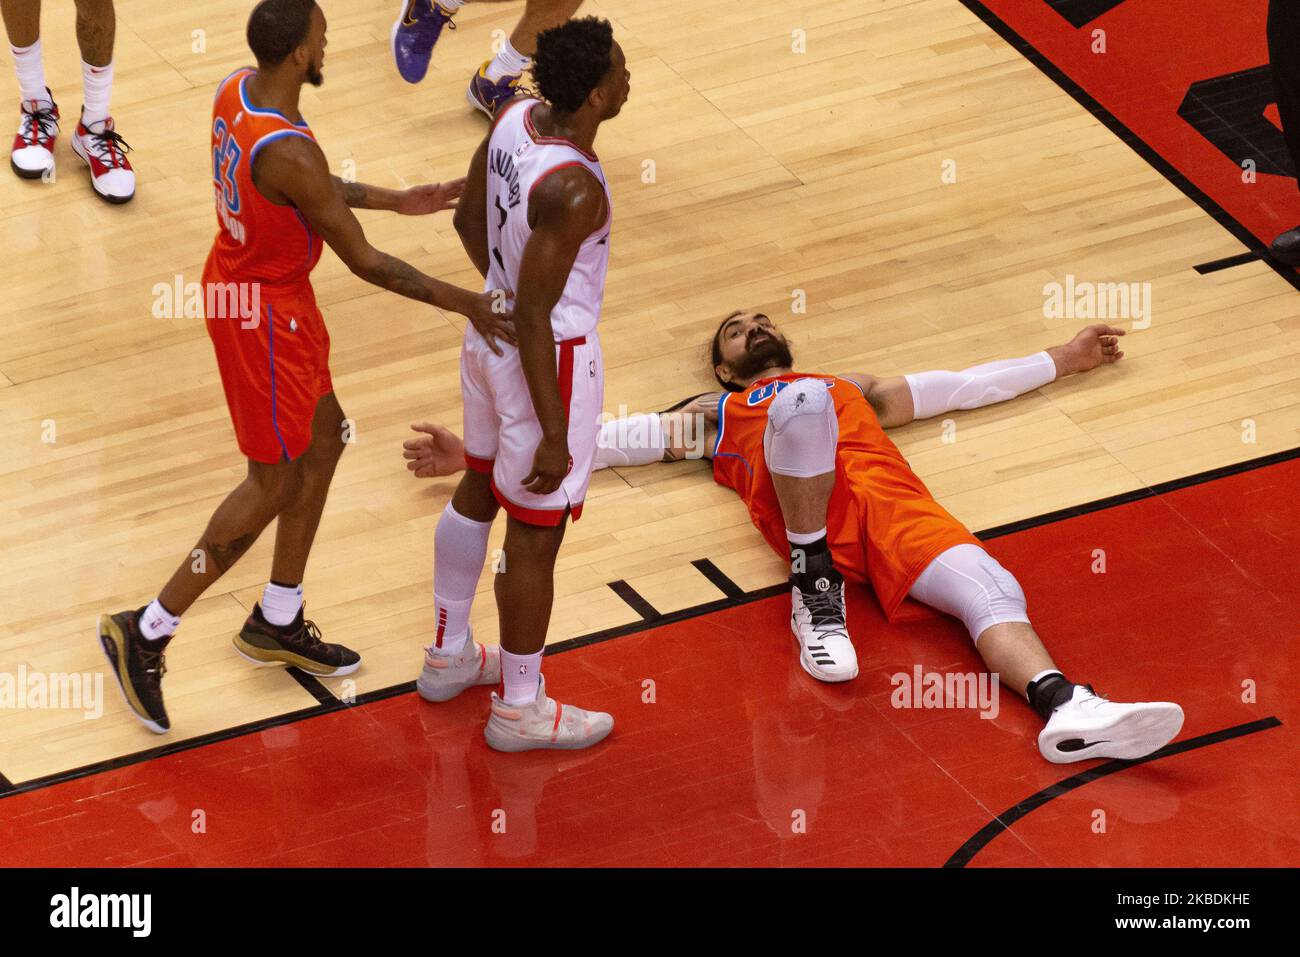 Steven Adams #12 of the Oklahoma City Thunder on the floor after collision during the Toronto Raptors vs Oklahoma City Thunder NBA regular season game at Scotiabank Arena on December 29, 2019, in Toronto, Canada (Oklahoma City Thunder won 98:97) (Photo by Anatoliy Cherkasov/NurPhoto) Stock Photo